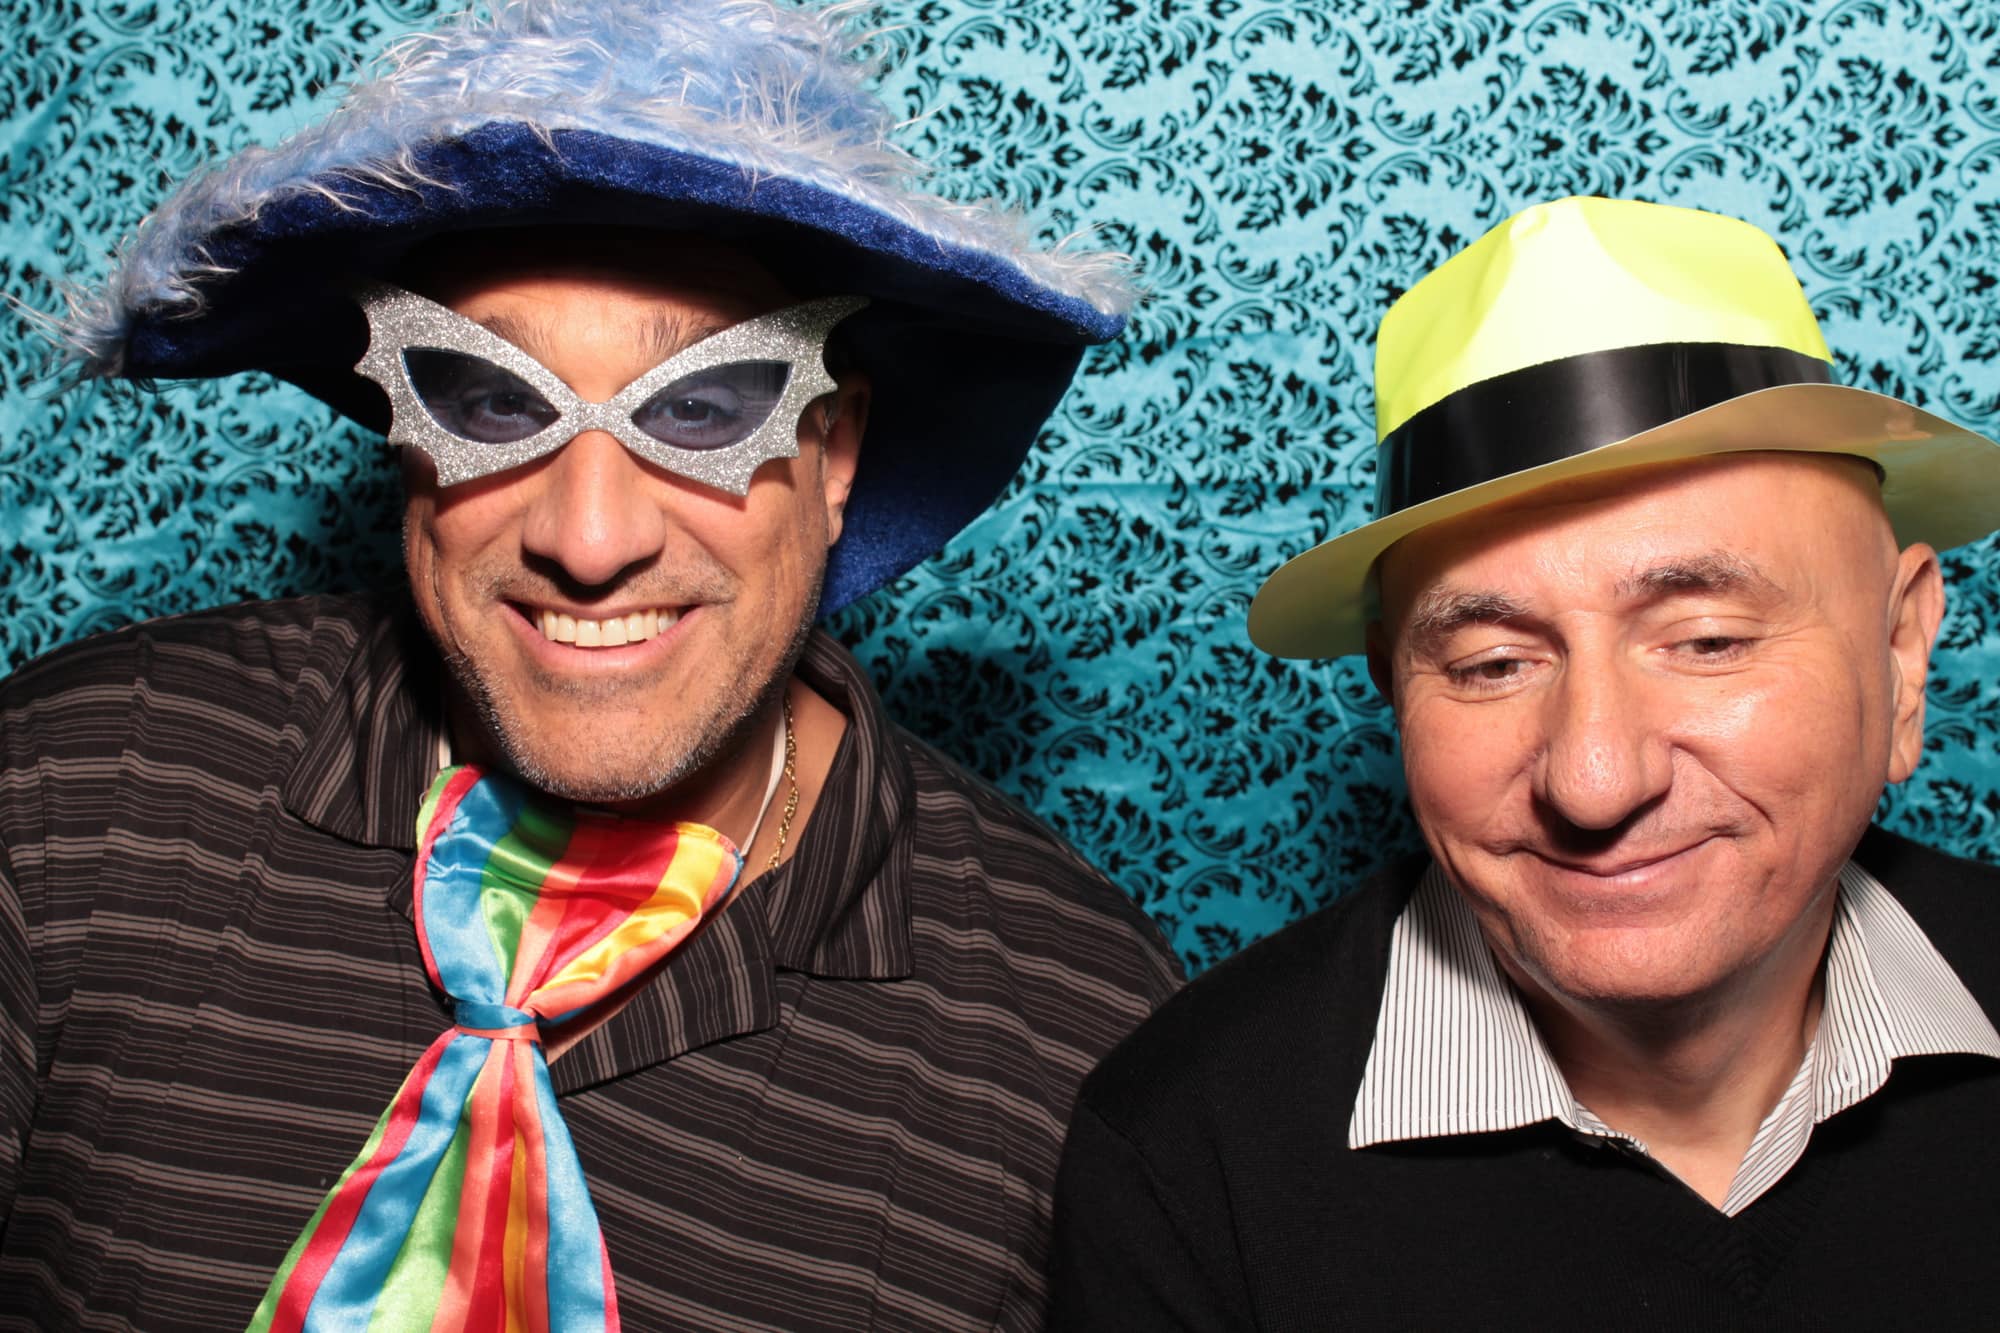 Photo Booth Rental-Corporate-Austin-Comedy-No. 1-Company-Events-Memories-Palm Door